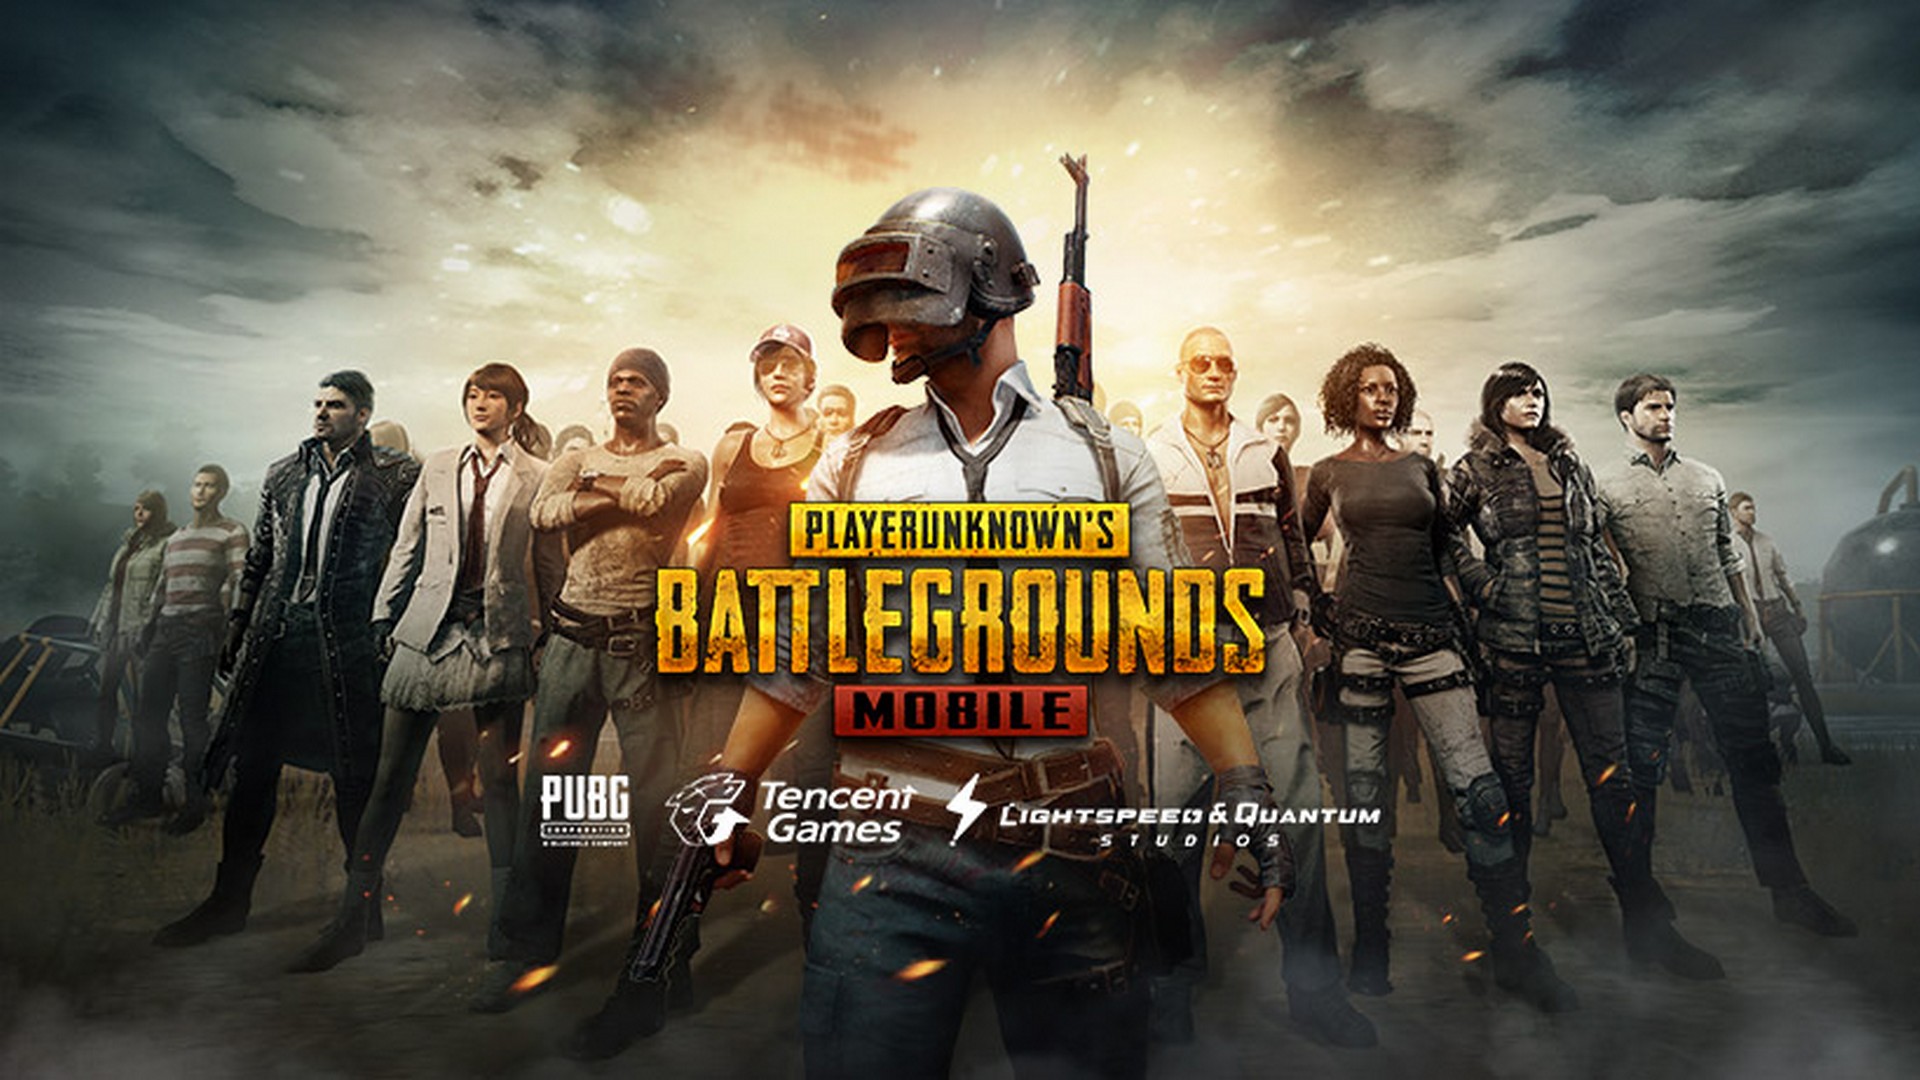 Wallpaper PUBG with image resolution 1920x1080 pixel. You can use this wallpaper as background for your desktop Computer Screensavers, Android or iPhone smartphones